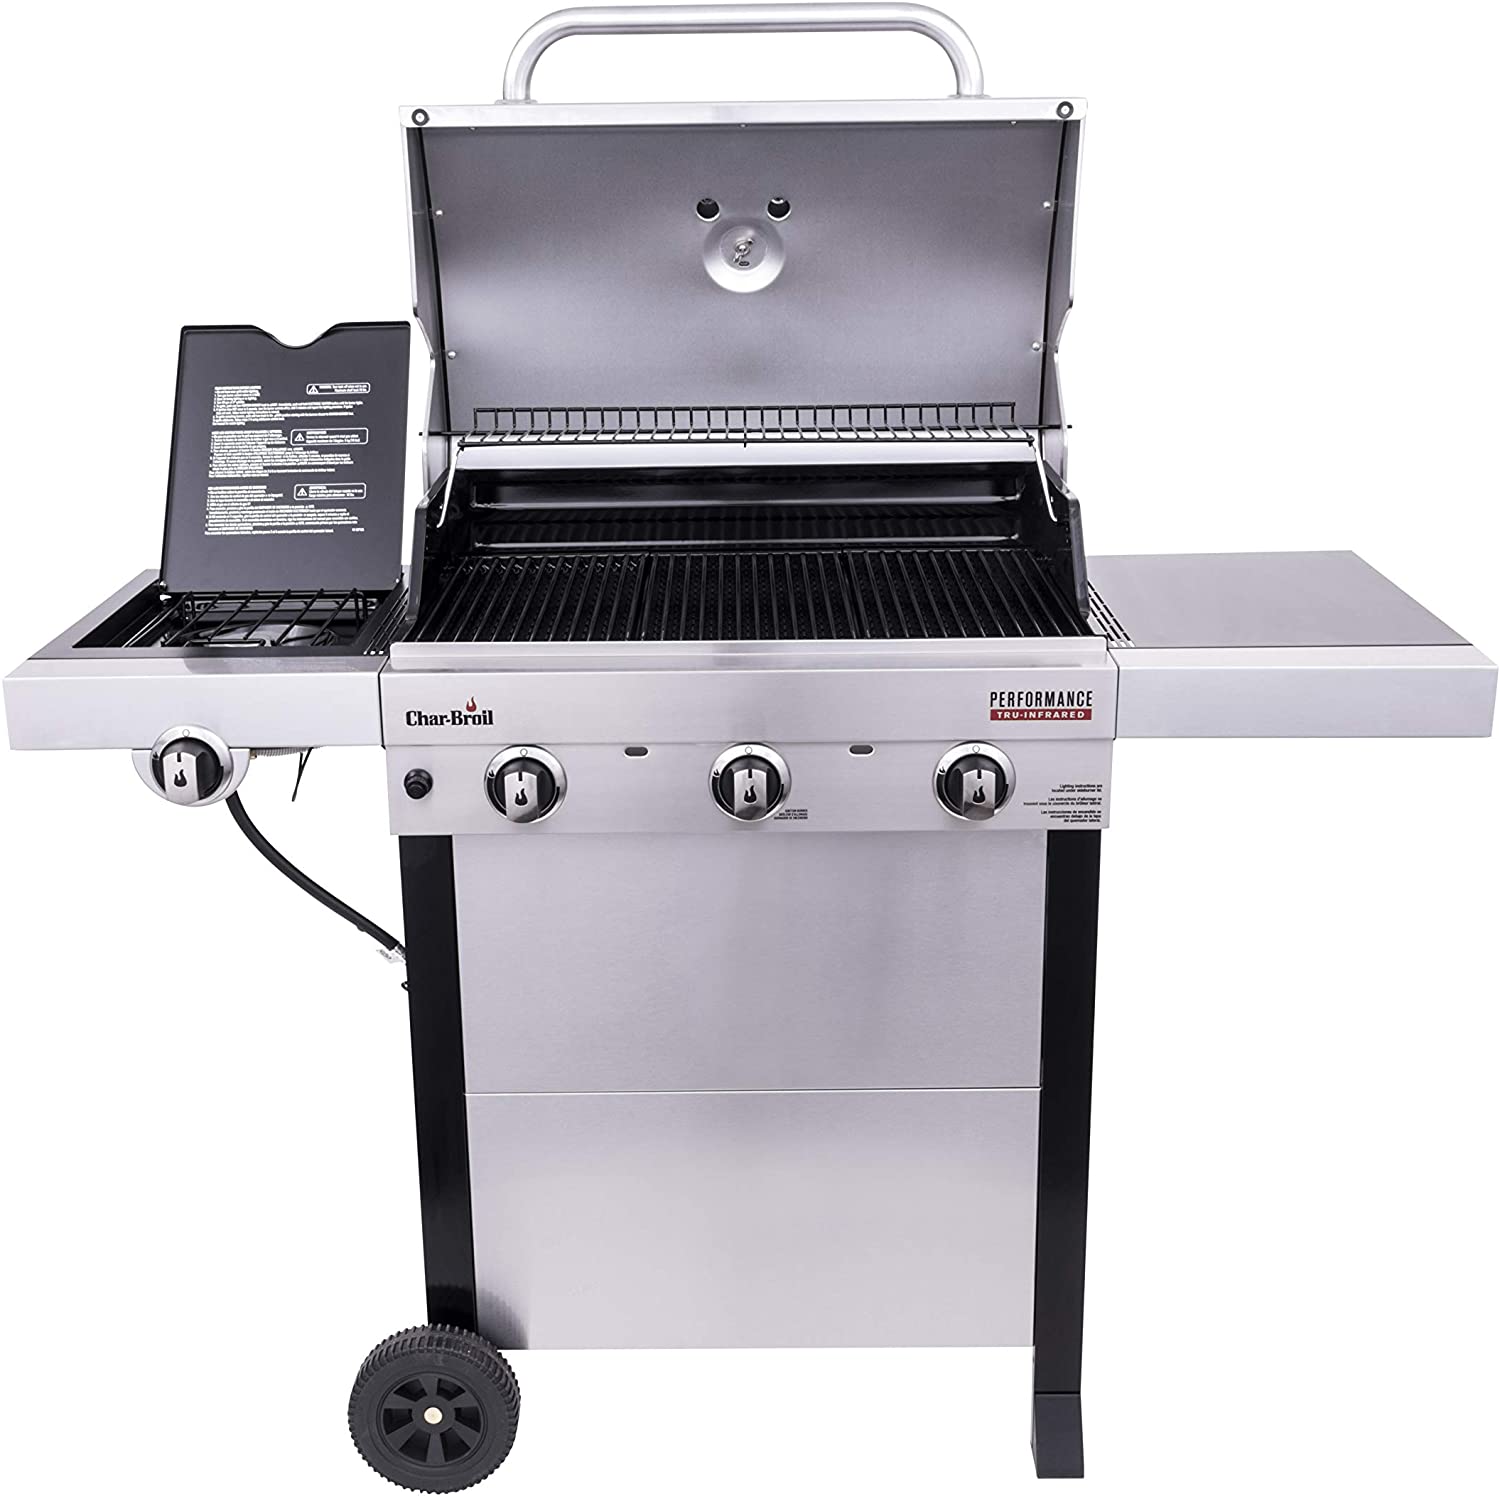 Char-Broil 463370719 Performance TRU-Infrared 3-Burner Cart Style Gas Grill, Stainless Steel - image 5 of 6